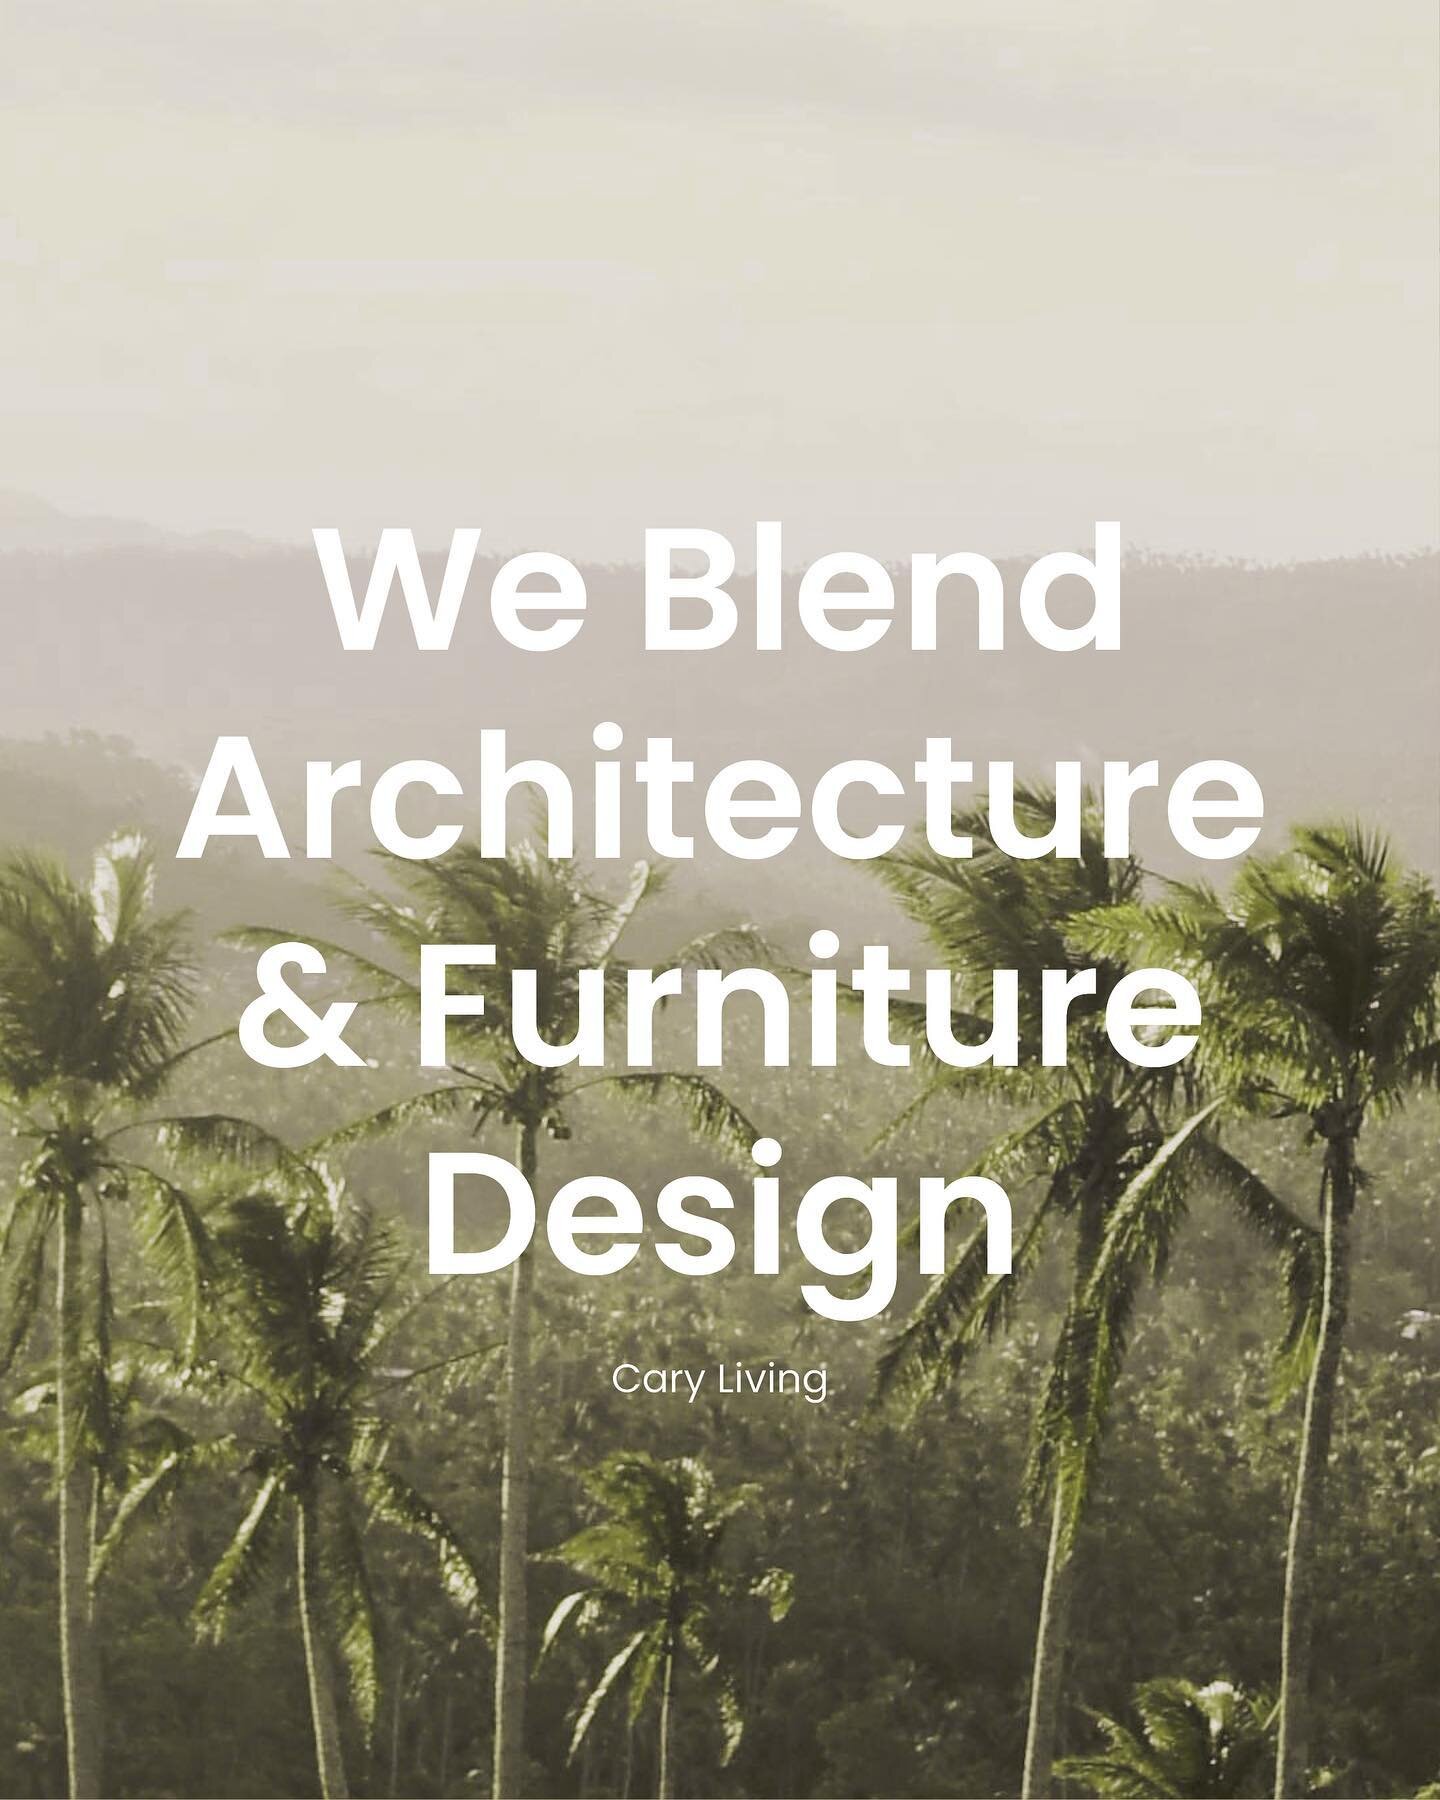 We have brought together years of experience working at a variety of project scales in architecture, interior design, furniture design, and product design to develop Cary Living. We are dedicated and trained to help you make the most of your space wi